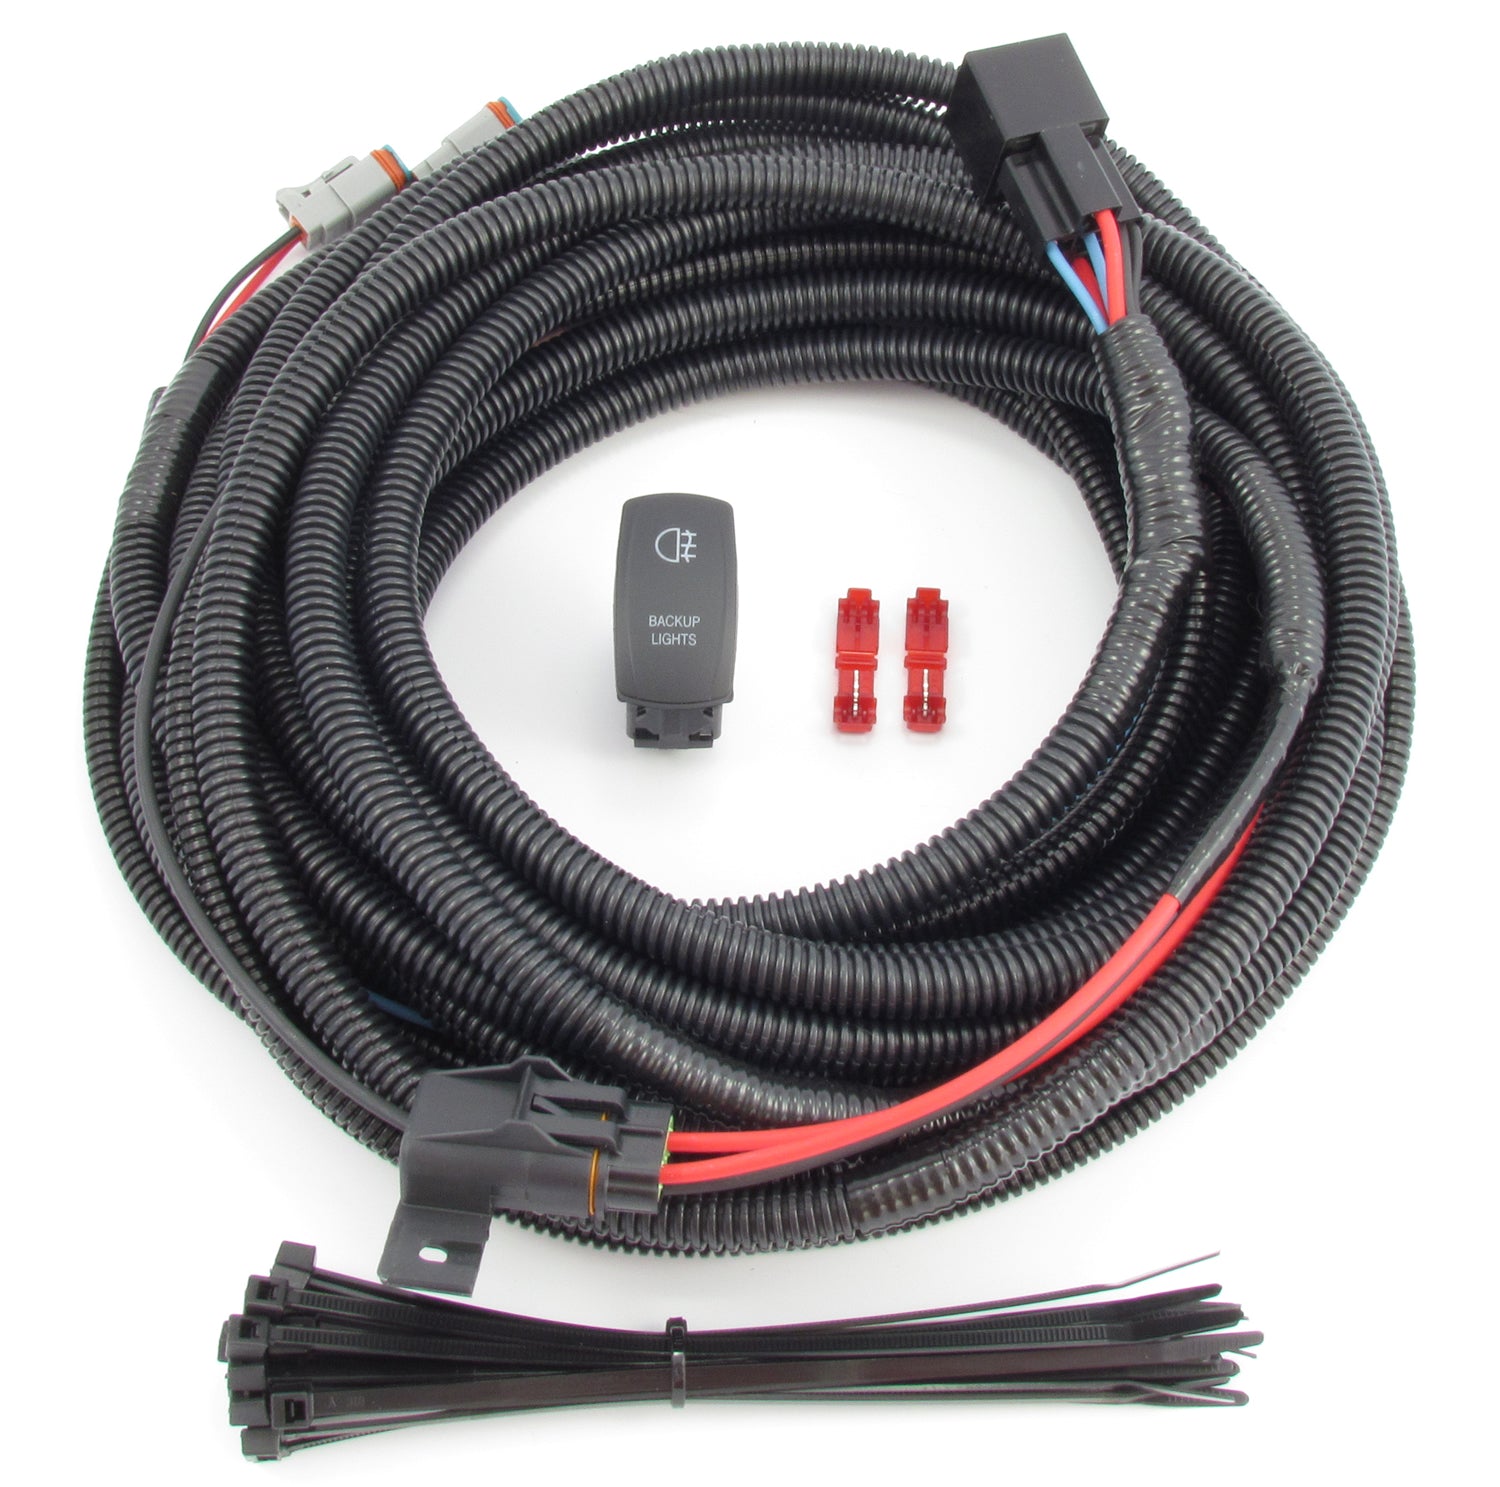 Backup/ Auxiliary Lighting Wiring & Switch Kit - Fits All Truck / SUV